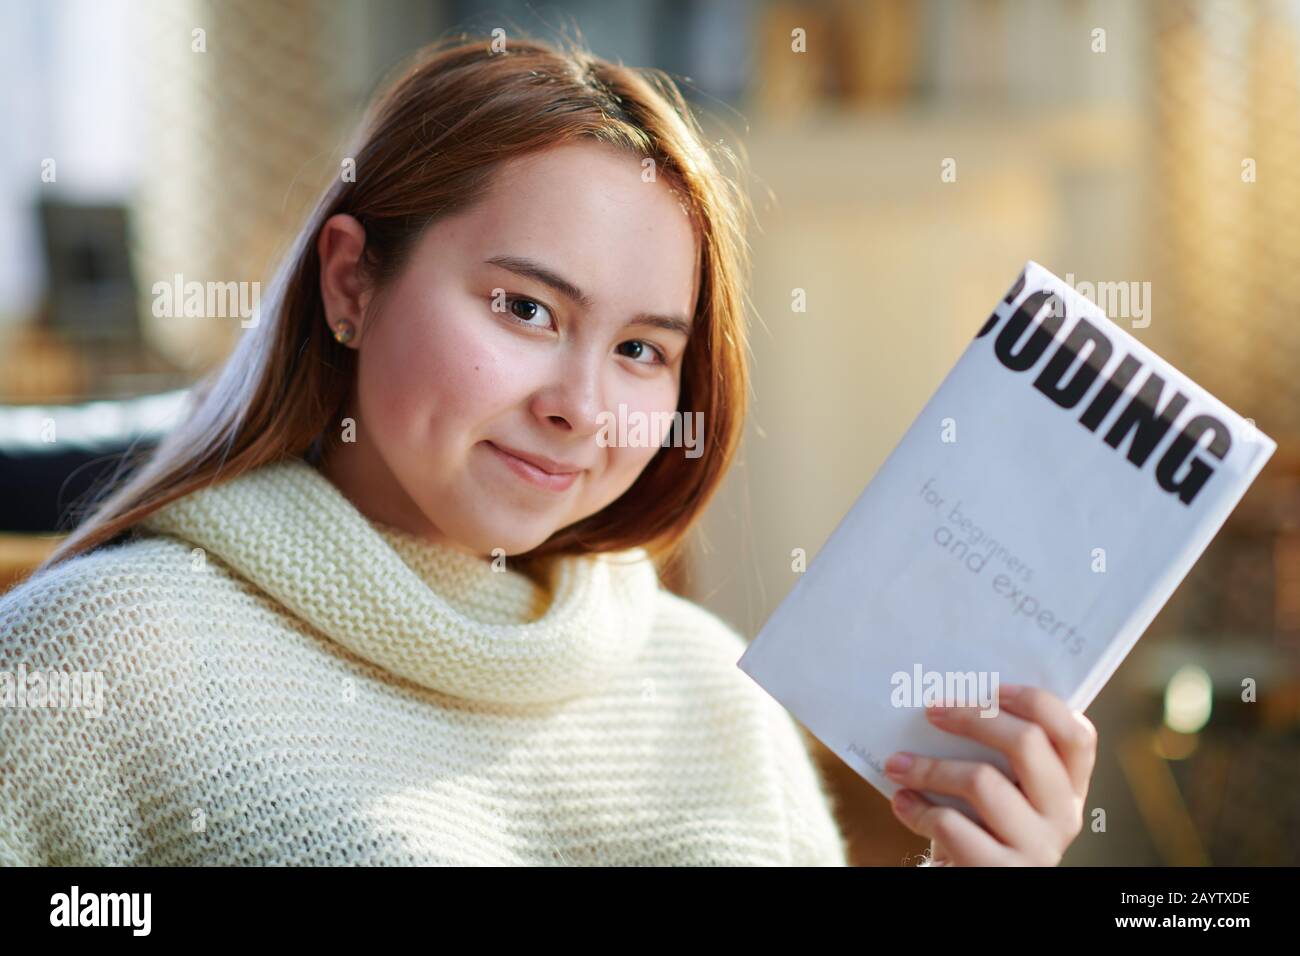 smiling modern teenage girl with red hair in white sweater in the modern house in sunny winter day showing educational coding book. Stock Photo